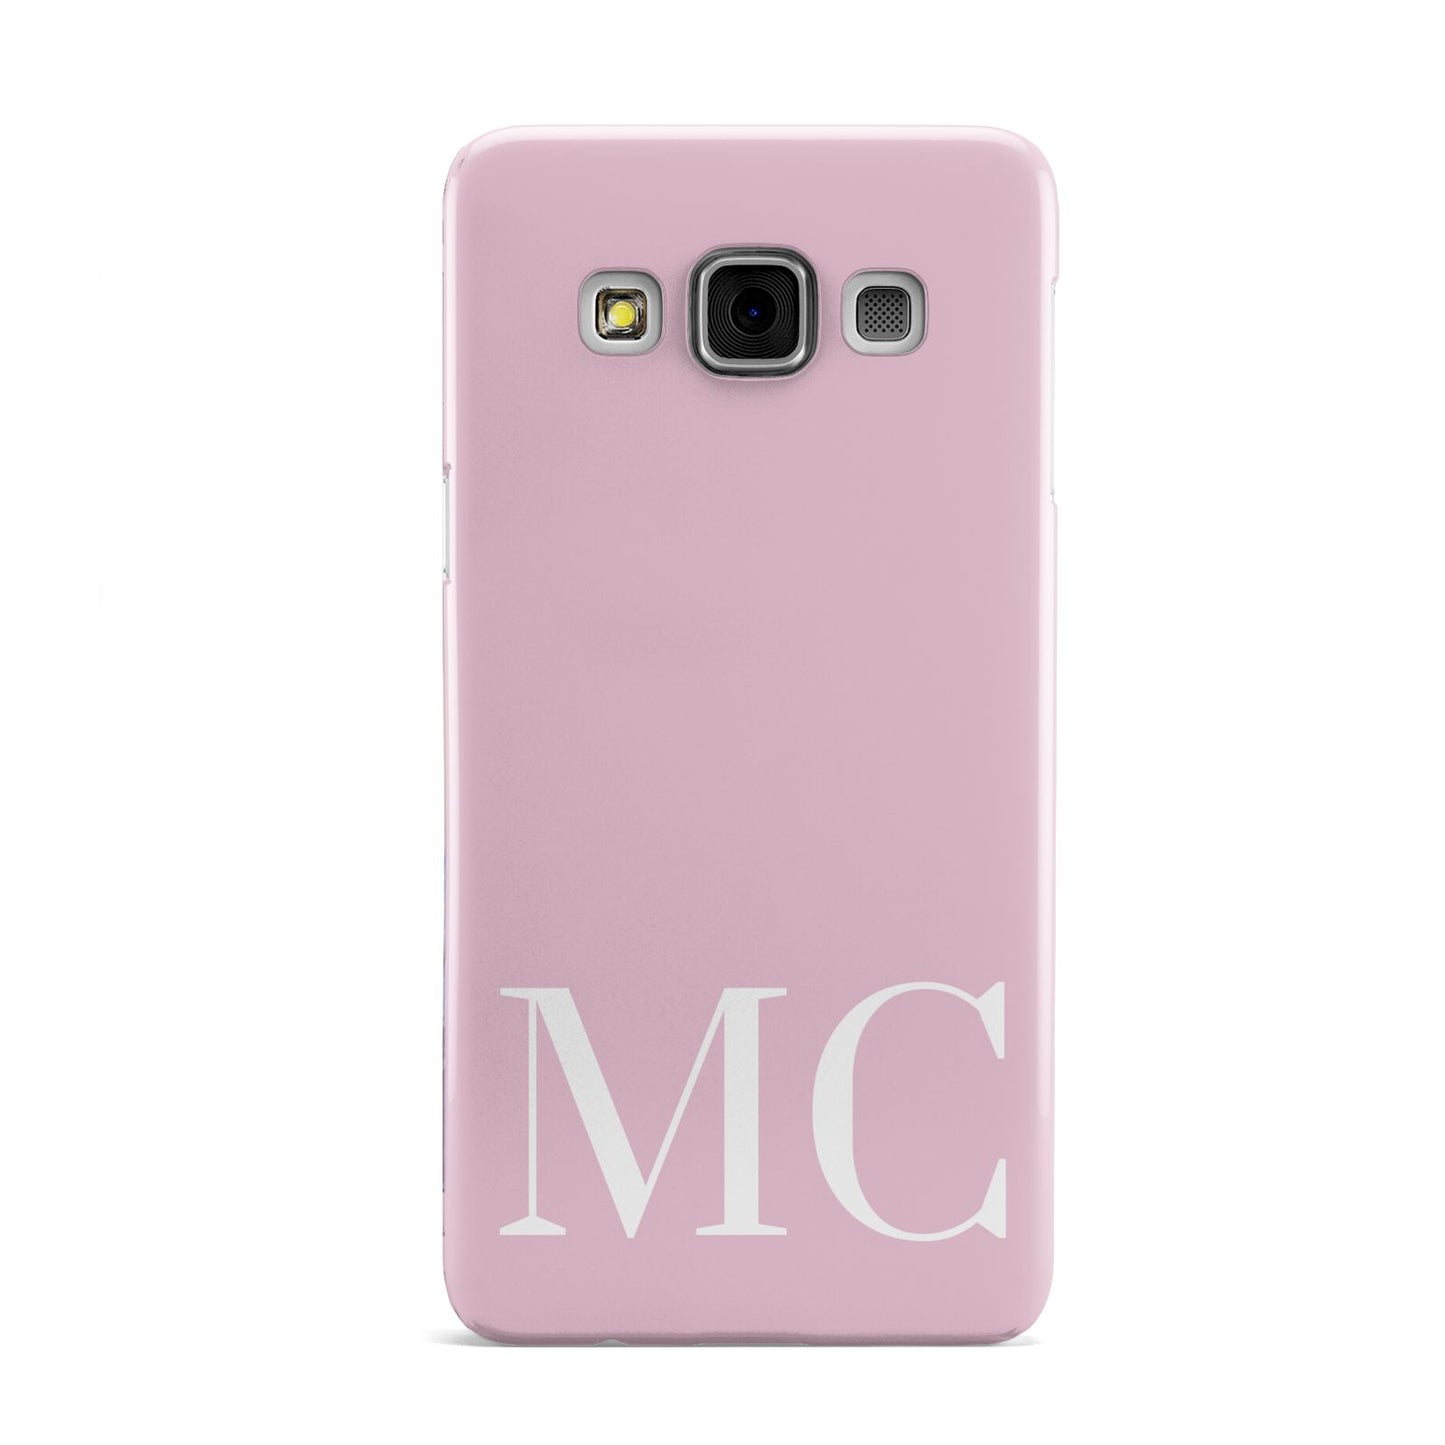 Initials Personalised 2 Samsung Galaxy A3 Case